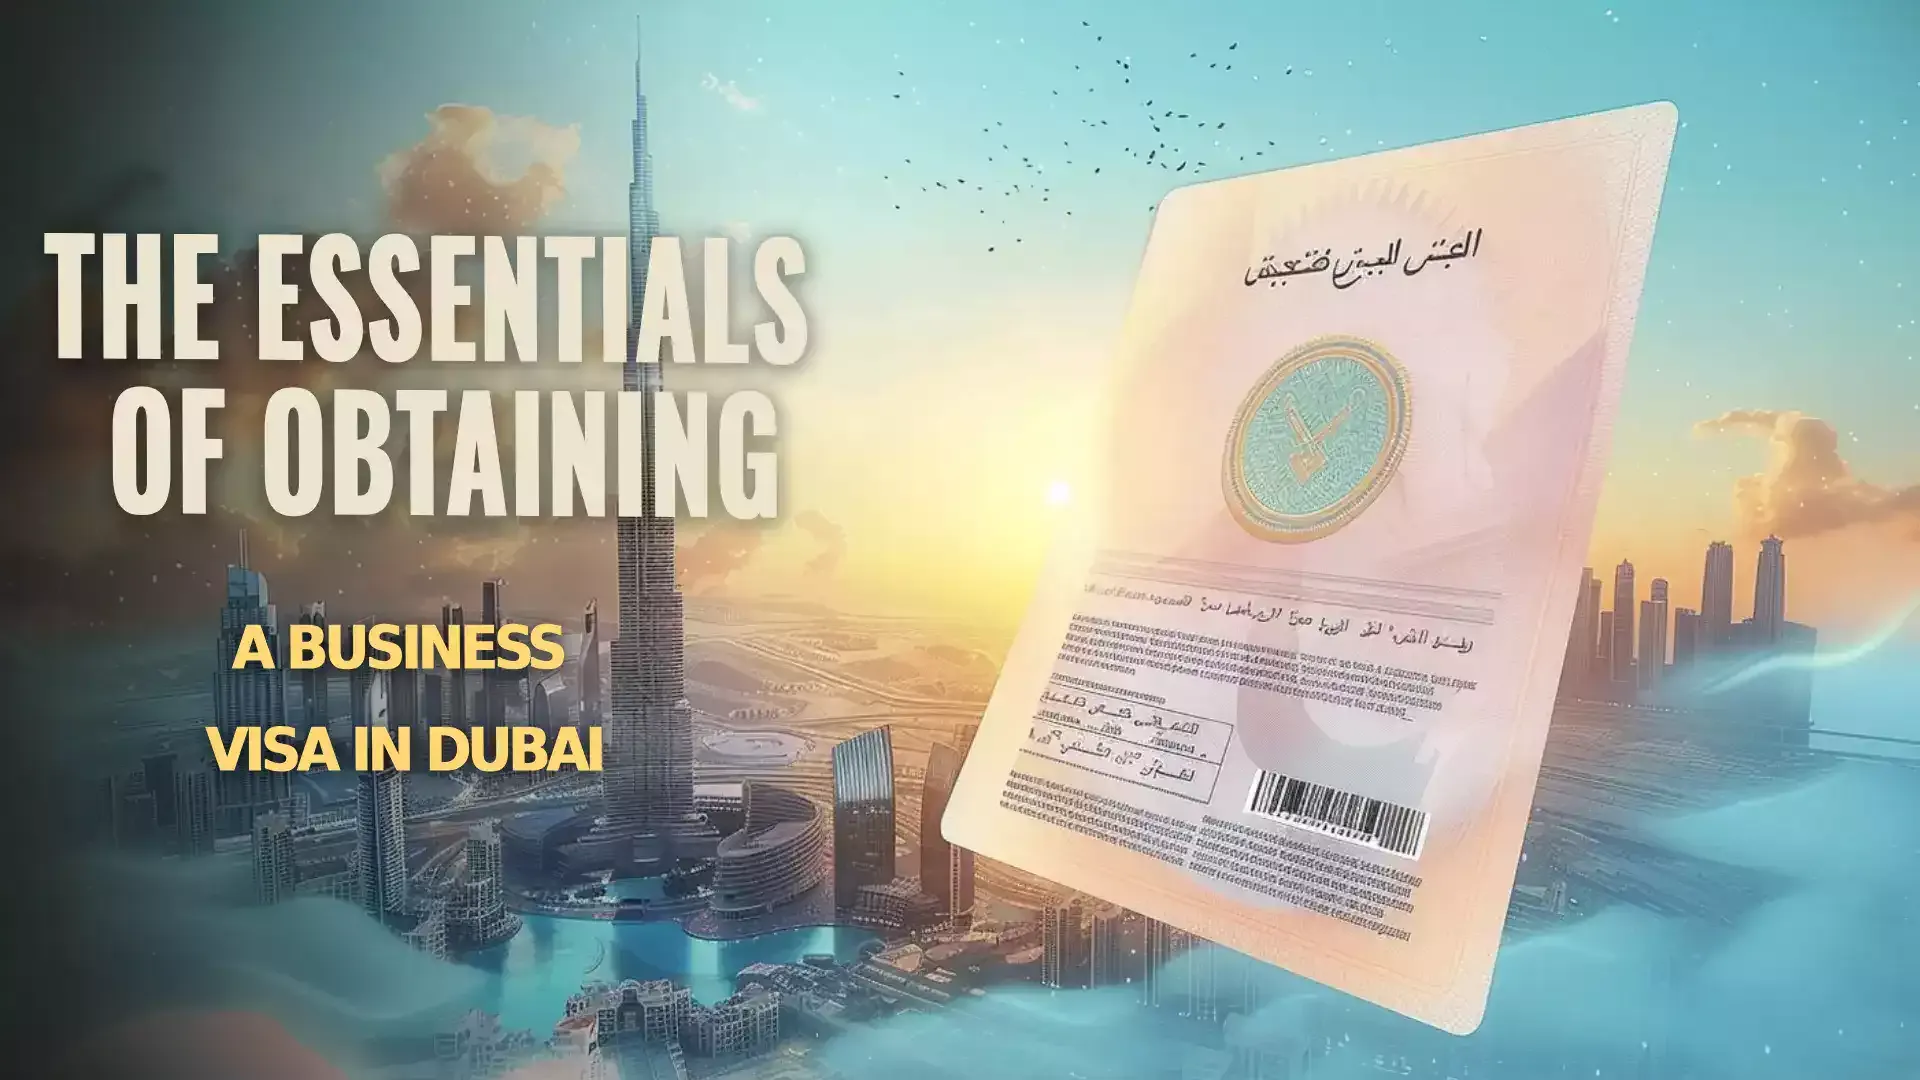 Illustration depicting the process of obtaining a business visa in Dubai